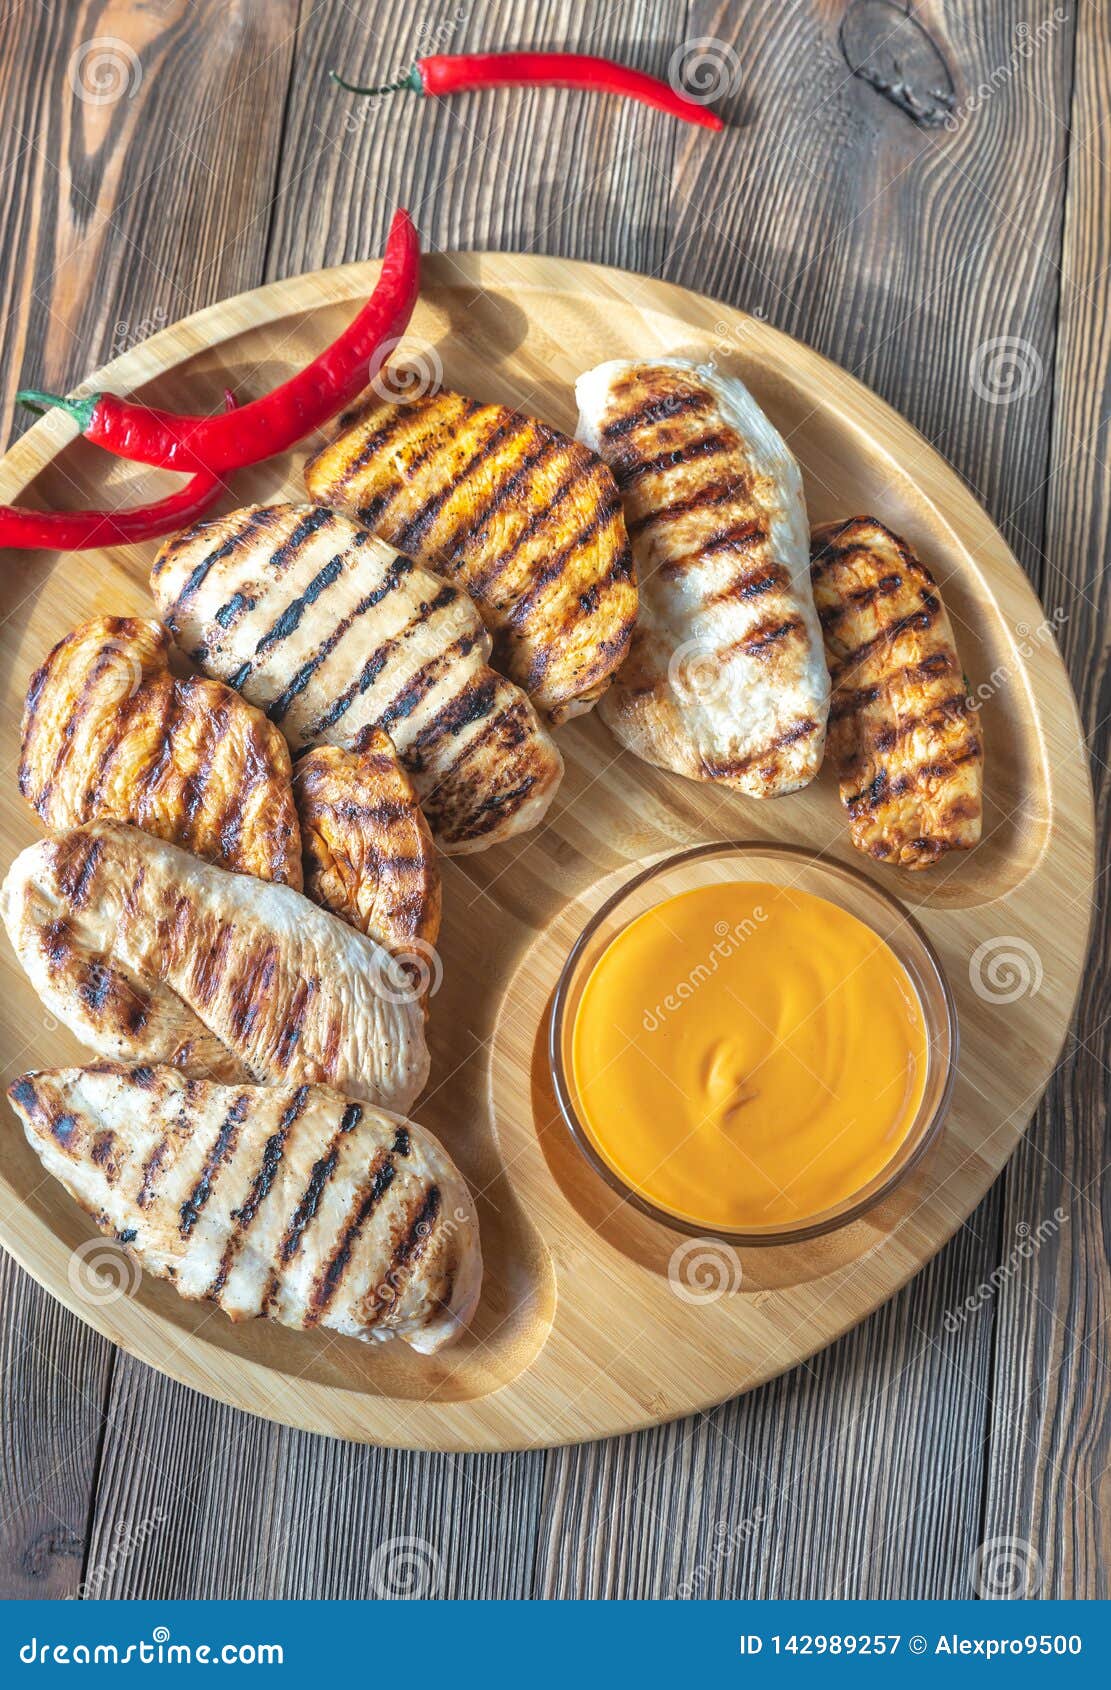 Grilled Chicken Breast on the Wooden Tray Stock Image - Image of group ...